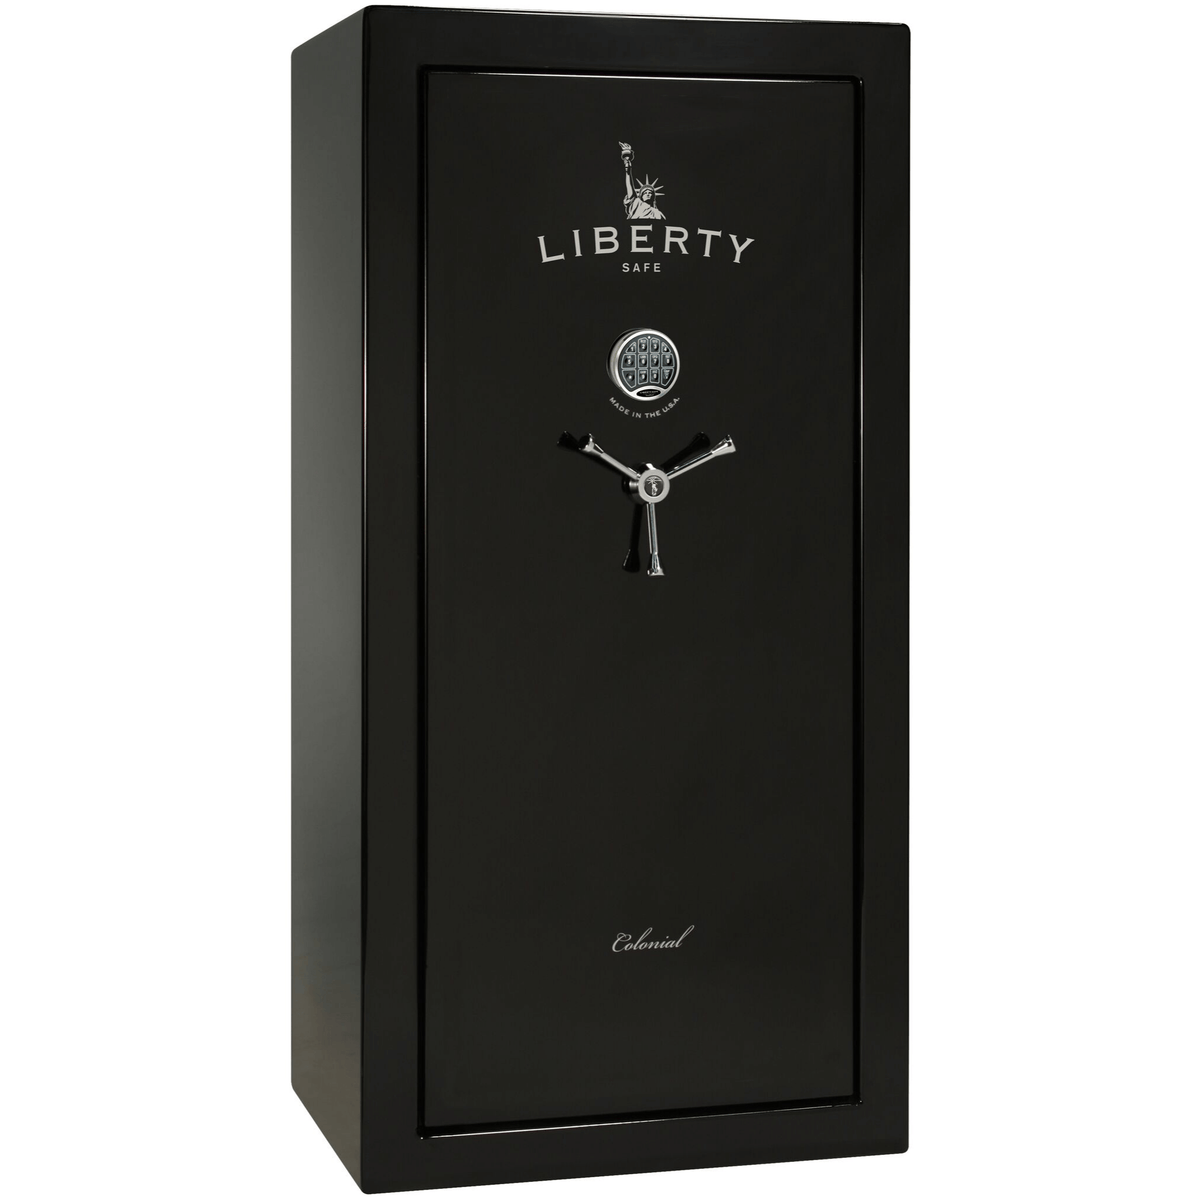 Liberty Colonial 23 Safe in Black Gloss with Chrome Electronic Lock.